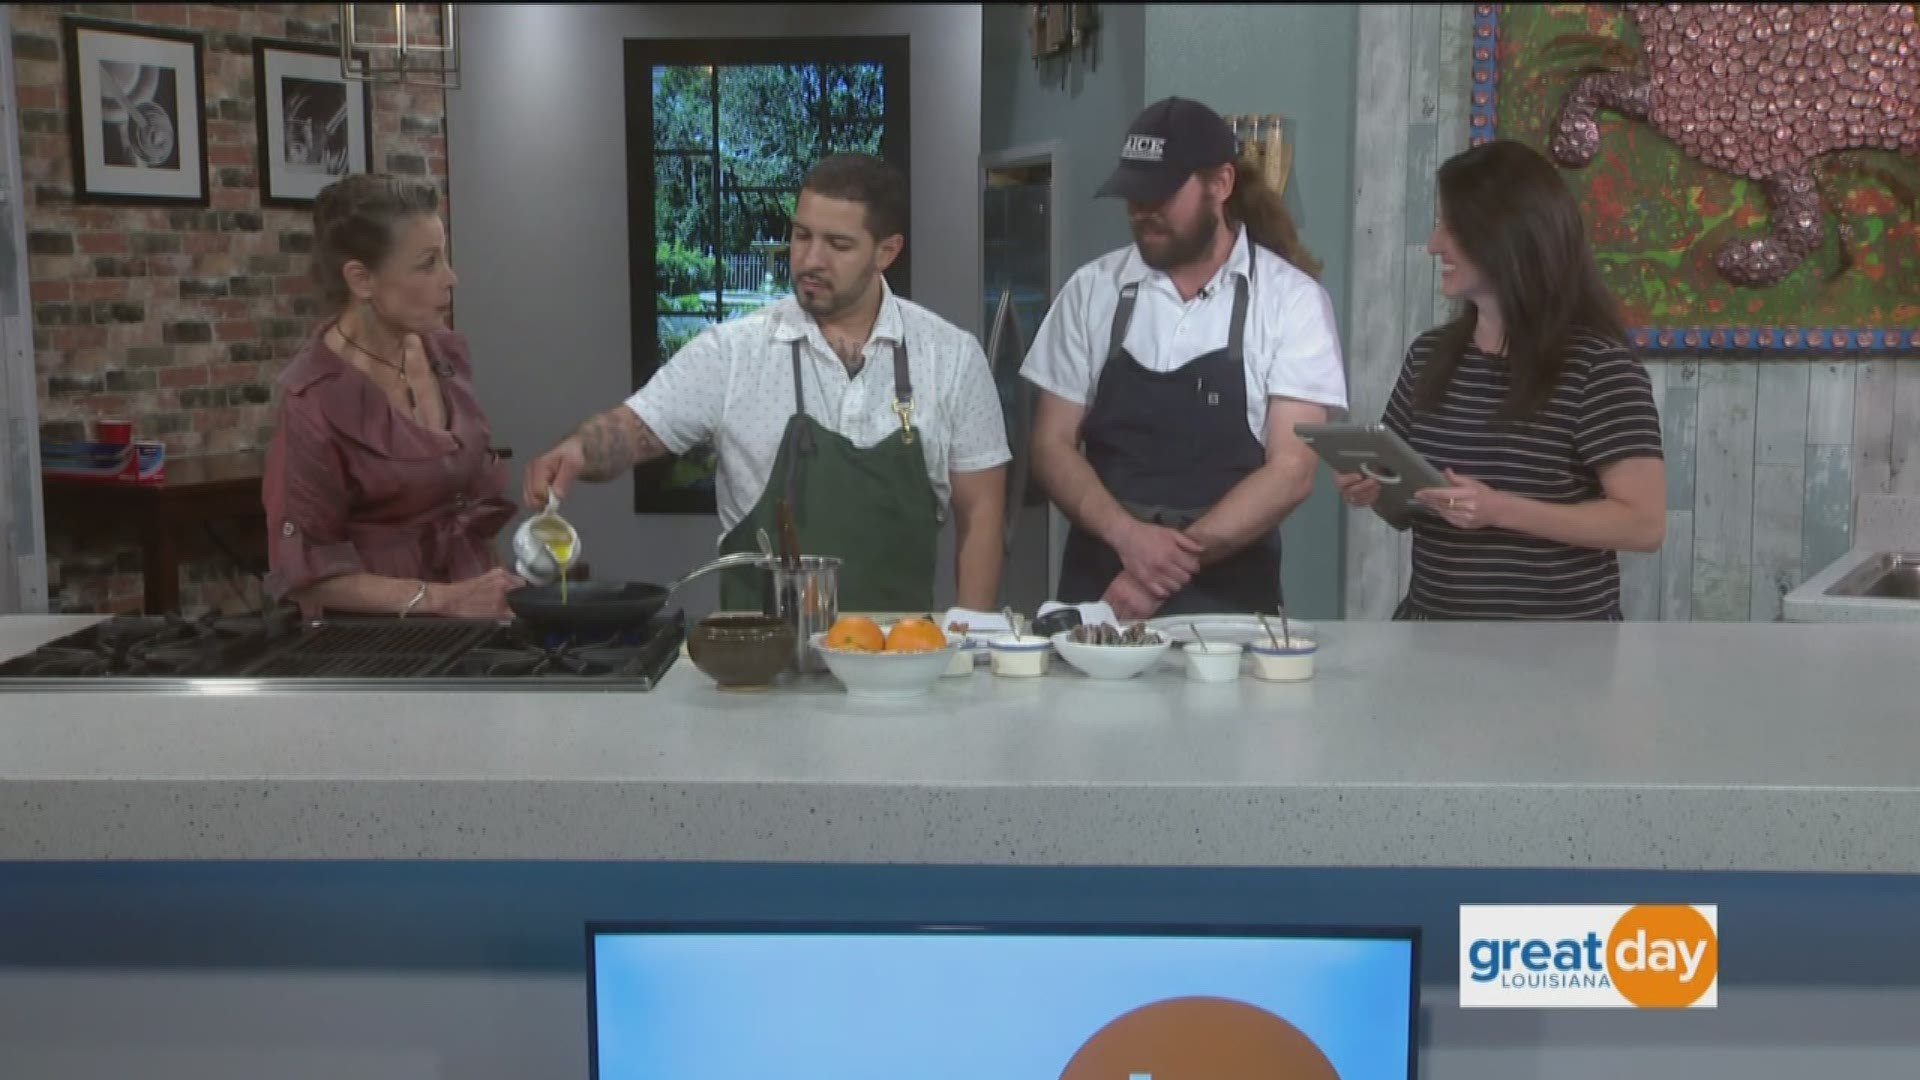 With so much French inspiration in the city, Parisian-inspired restaurant Saint-Germain feels right at home in its Bywater location. Owners Trey Smith and Blake Aguillard join us in the Great Day kitchen with Poppy Tooker to tell us more. Go to SaintGermainNOLA.com for more information.